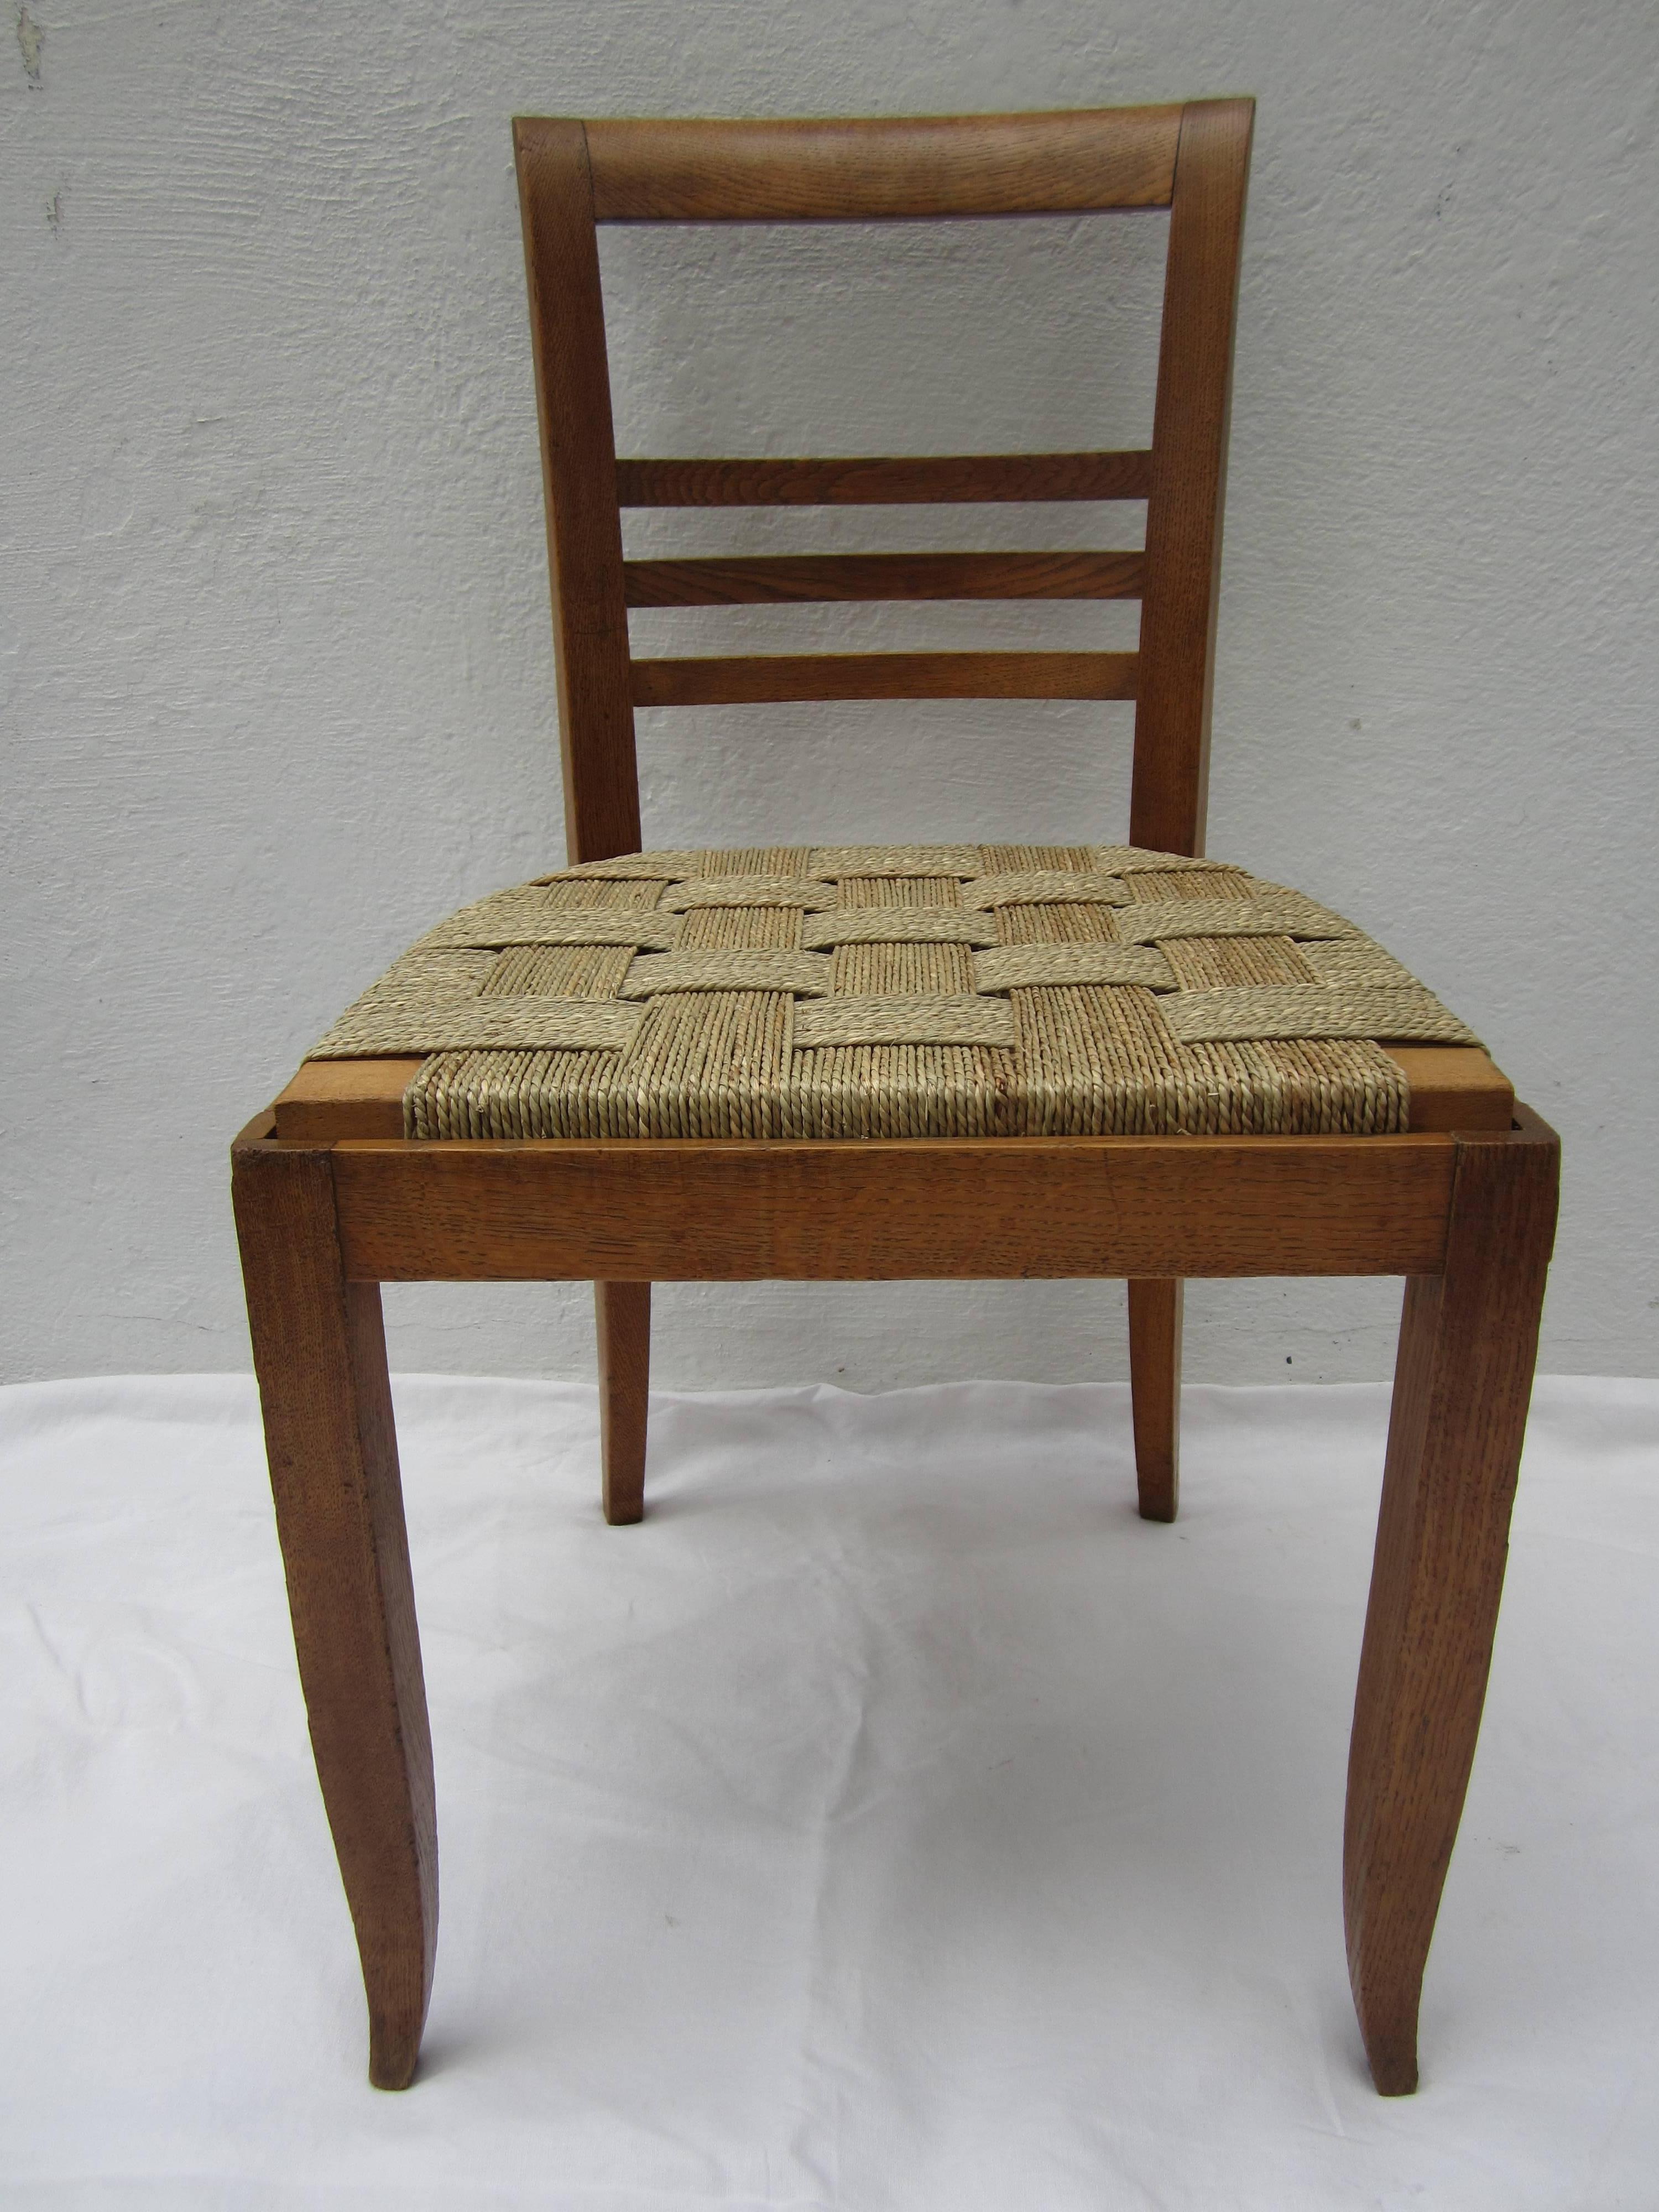 Set of six French oak chairs with basket woven seagrass seats (newly refurbished.)